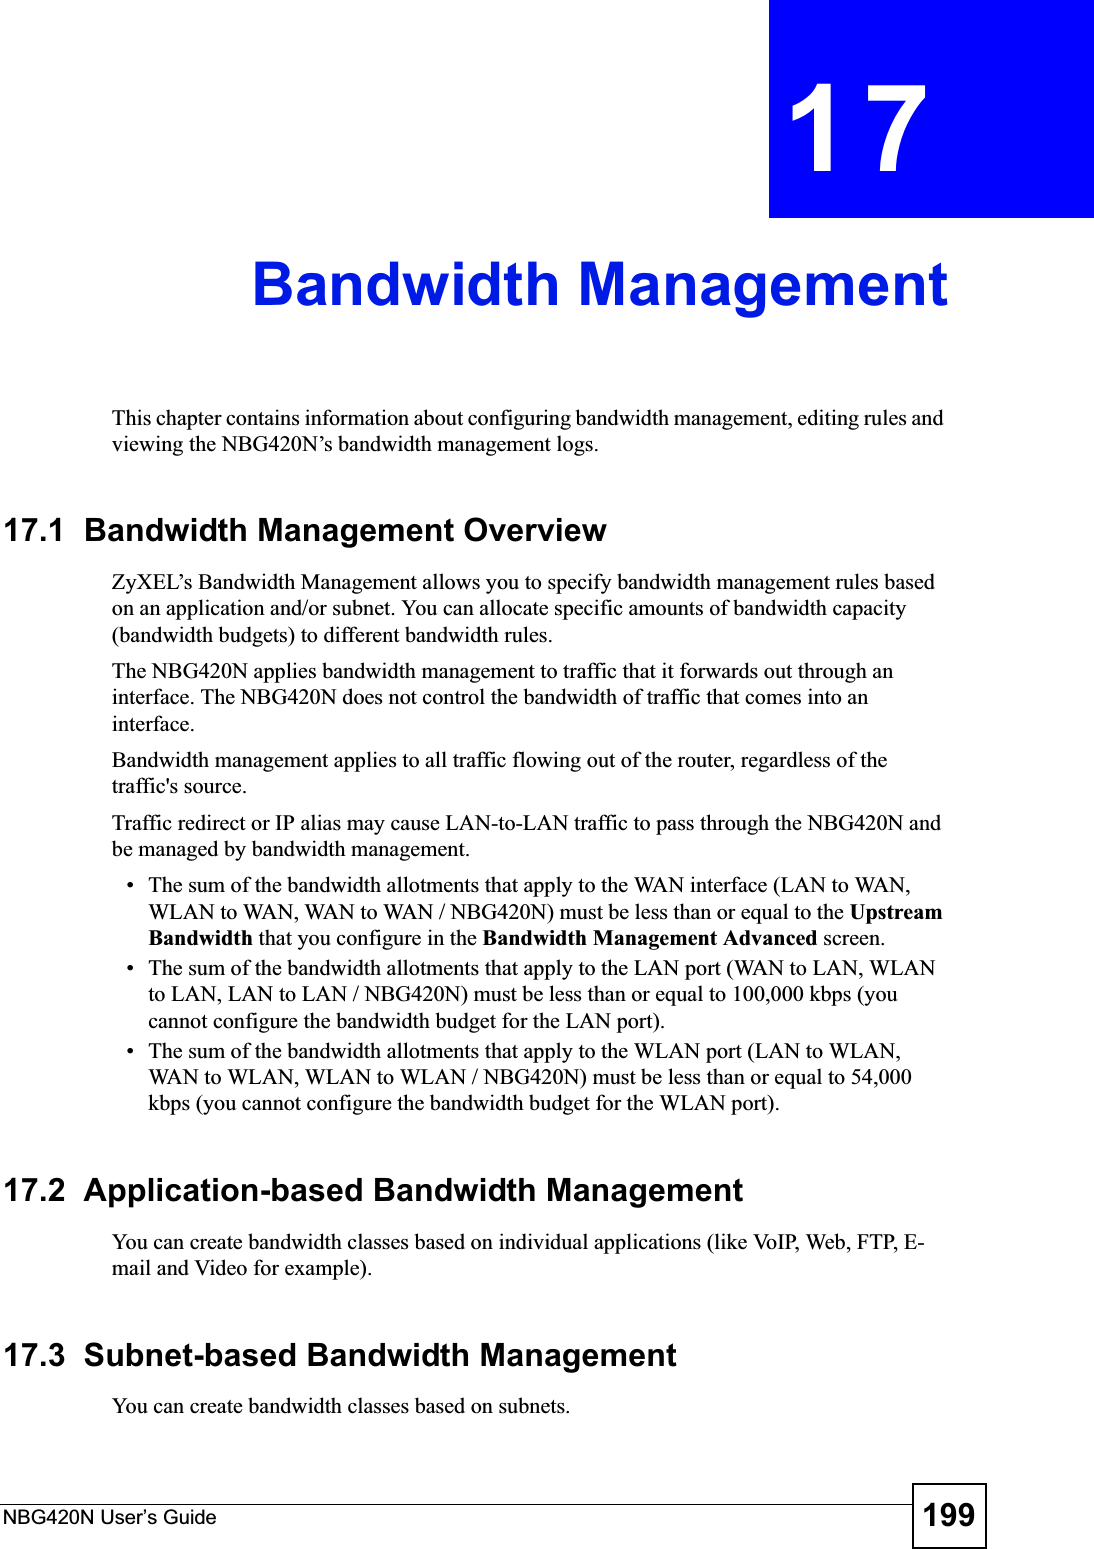 NBG420N User’s Guide 199CHAPTER 17Bandwidth ManagementThis chapter contains information about configuring bandwidth management, editing rules and viewing the NBG420N’s bandwidth management logs.17.1  Bandwidth Management Overview ZyXEL’s Bandwidth Management allows you to specify bandwidth management rules based on an application and/or subnet. You can allocate specific amounts of bandwidth capacity (bandwidth budgets) to different bandwidth rules. The NBG420N applies bandwidth management to traffic that it forwards out through an interface. The NBG420N does not control the bandwidth of traffic that comes into an interface.Bandwidth management applies to all traffic flowing out of the router, regardless of the traffic&apos;s source.Traffic redirect or IP alias may cause LAN-to-LAN traffic to pass through the NBG420N and be managed by bandwidth management. • The sum of the bandwidth allotments that apply to the WAN interface (LAN to WAN, WLAN to WAN, WAN to WAN / NBG420N) must be less than or equal to the Upstream Bandwidth that you configure in the Bandwidth Management Advanced screen. • The sum of the bandwidth allotments that apply to the LAN port (WAN to LAN, WLAN to LAN, LAN to LAN / NBG420N) must be less than or equal to 100,000 kbps (you cannot configure the bandwidth budget for the LAN port). • The sum of the bandwidth allotments that apply to the WLAN port (LAN to WLAN, WAN to WLAN, WLAN to WLAN / NBG420N) must be less than or equal to 54,000 kbps (you cannot configure the bandwidth budget for the WLAN port). 17.2  Application-based Bandwidth ManagementYou can create bandwidth classes based on individual applications (like VoIP, Web, FTP, E-mail and Video for example).17.3  Subnet-based Bandwidth ManagementYou can create bandwidth classes based on subnets.